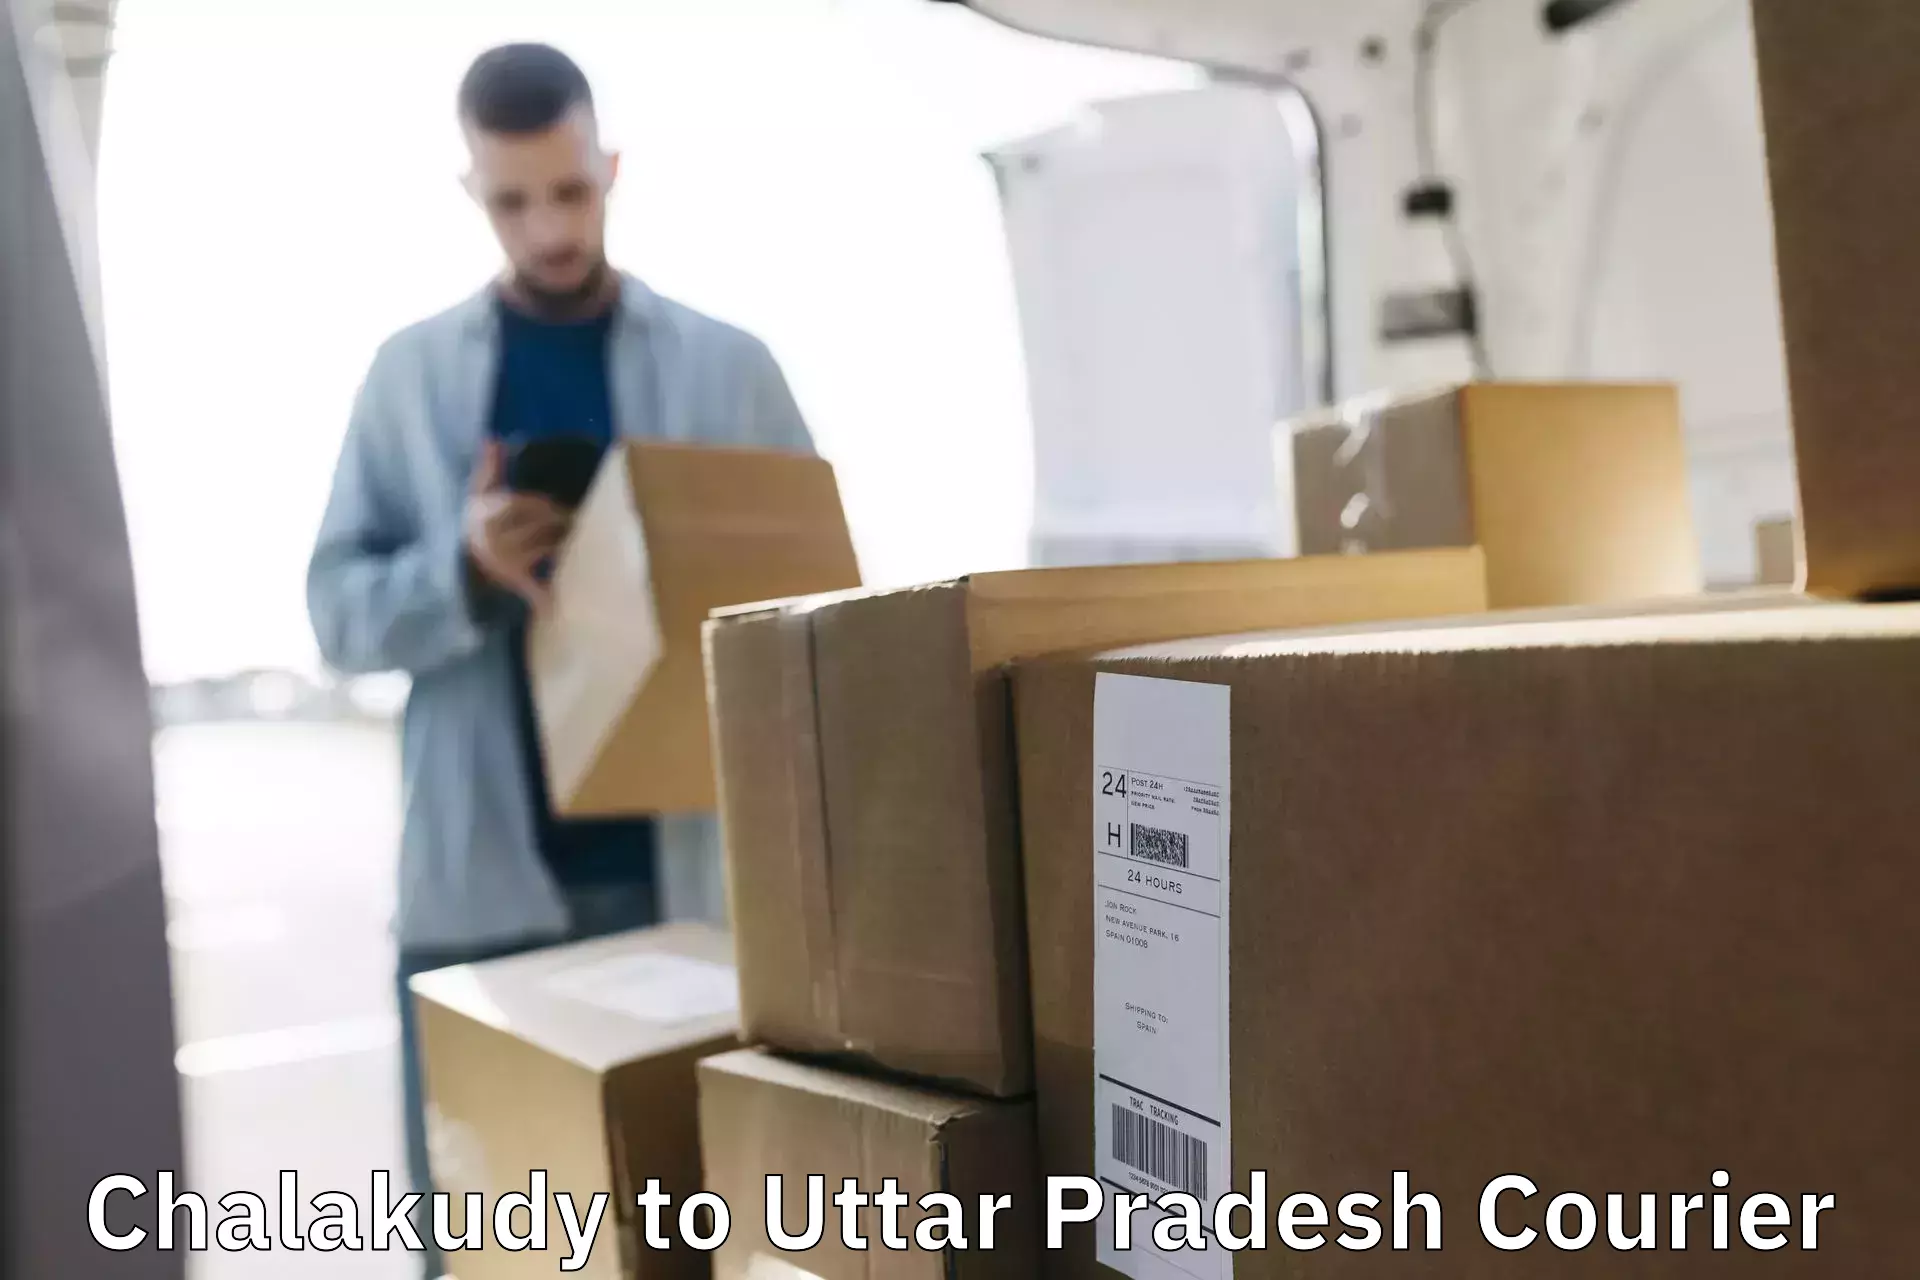 Reliable courier service in Chalakudy to Koraon